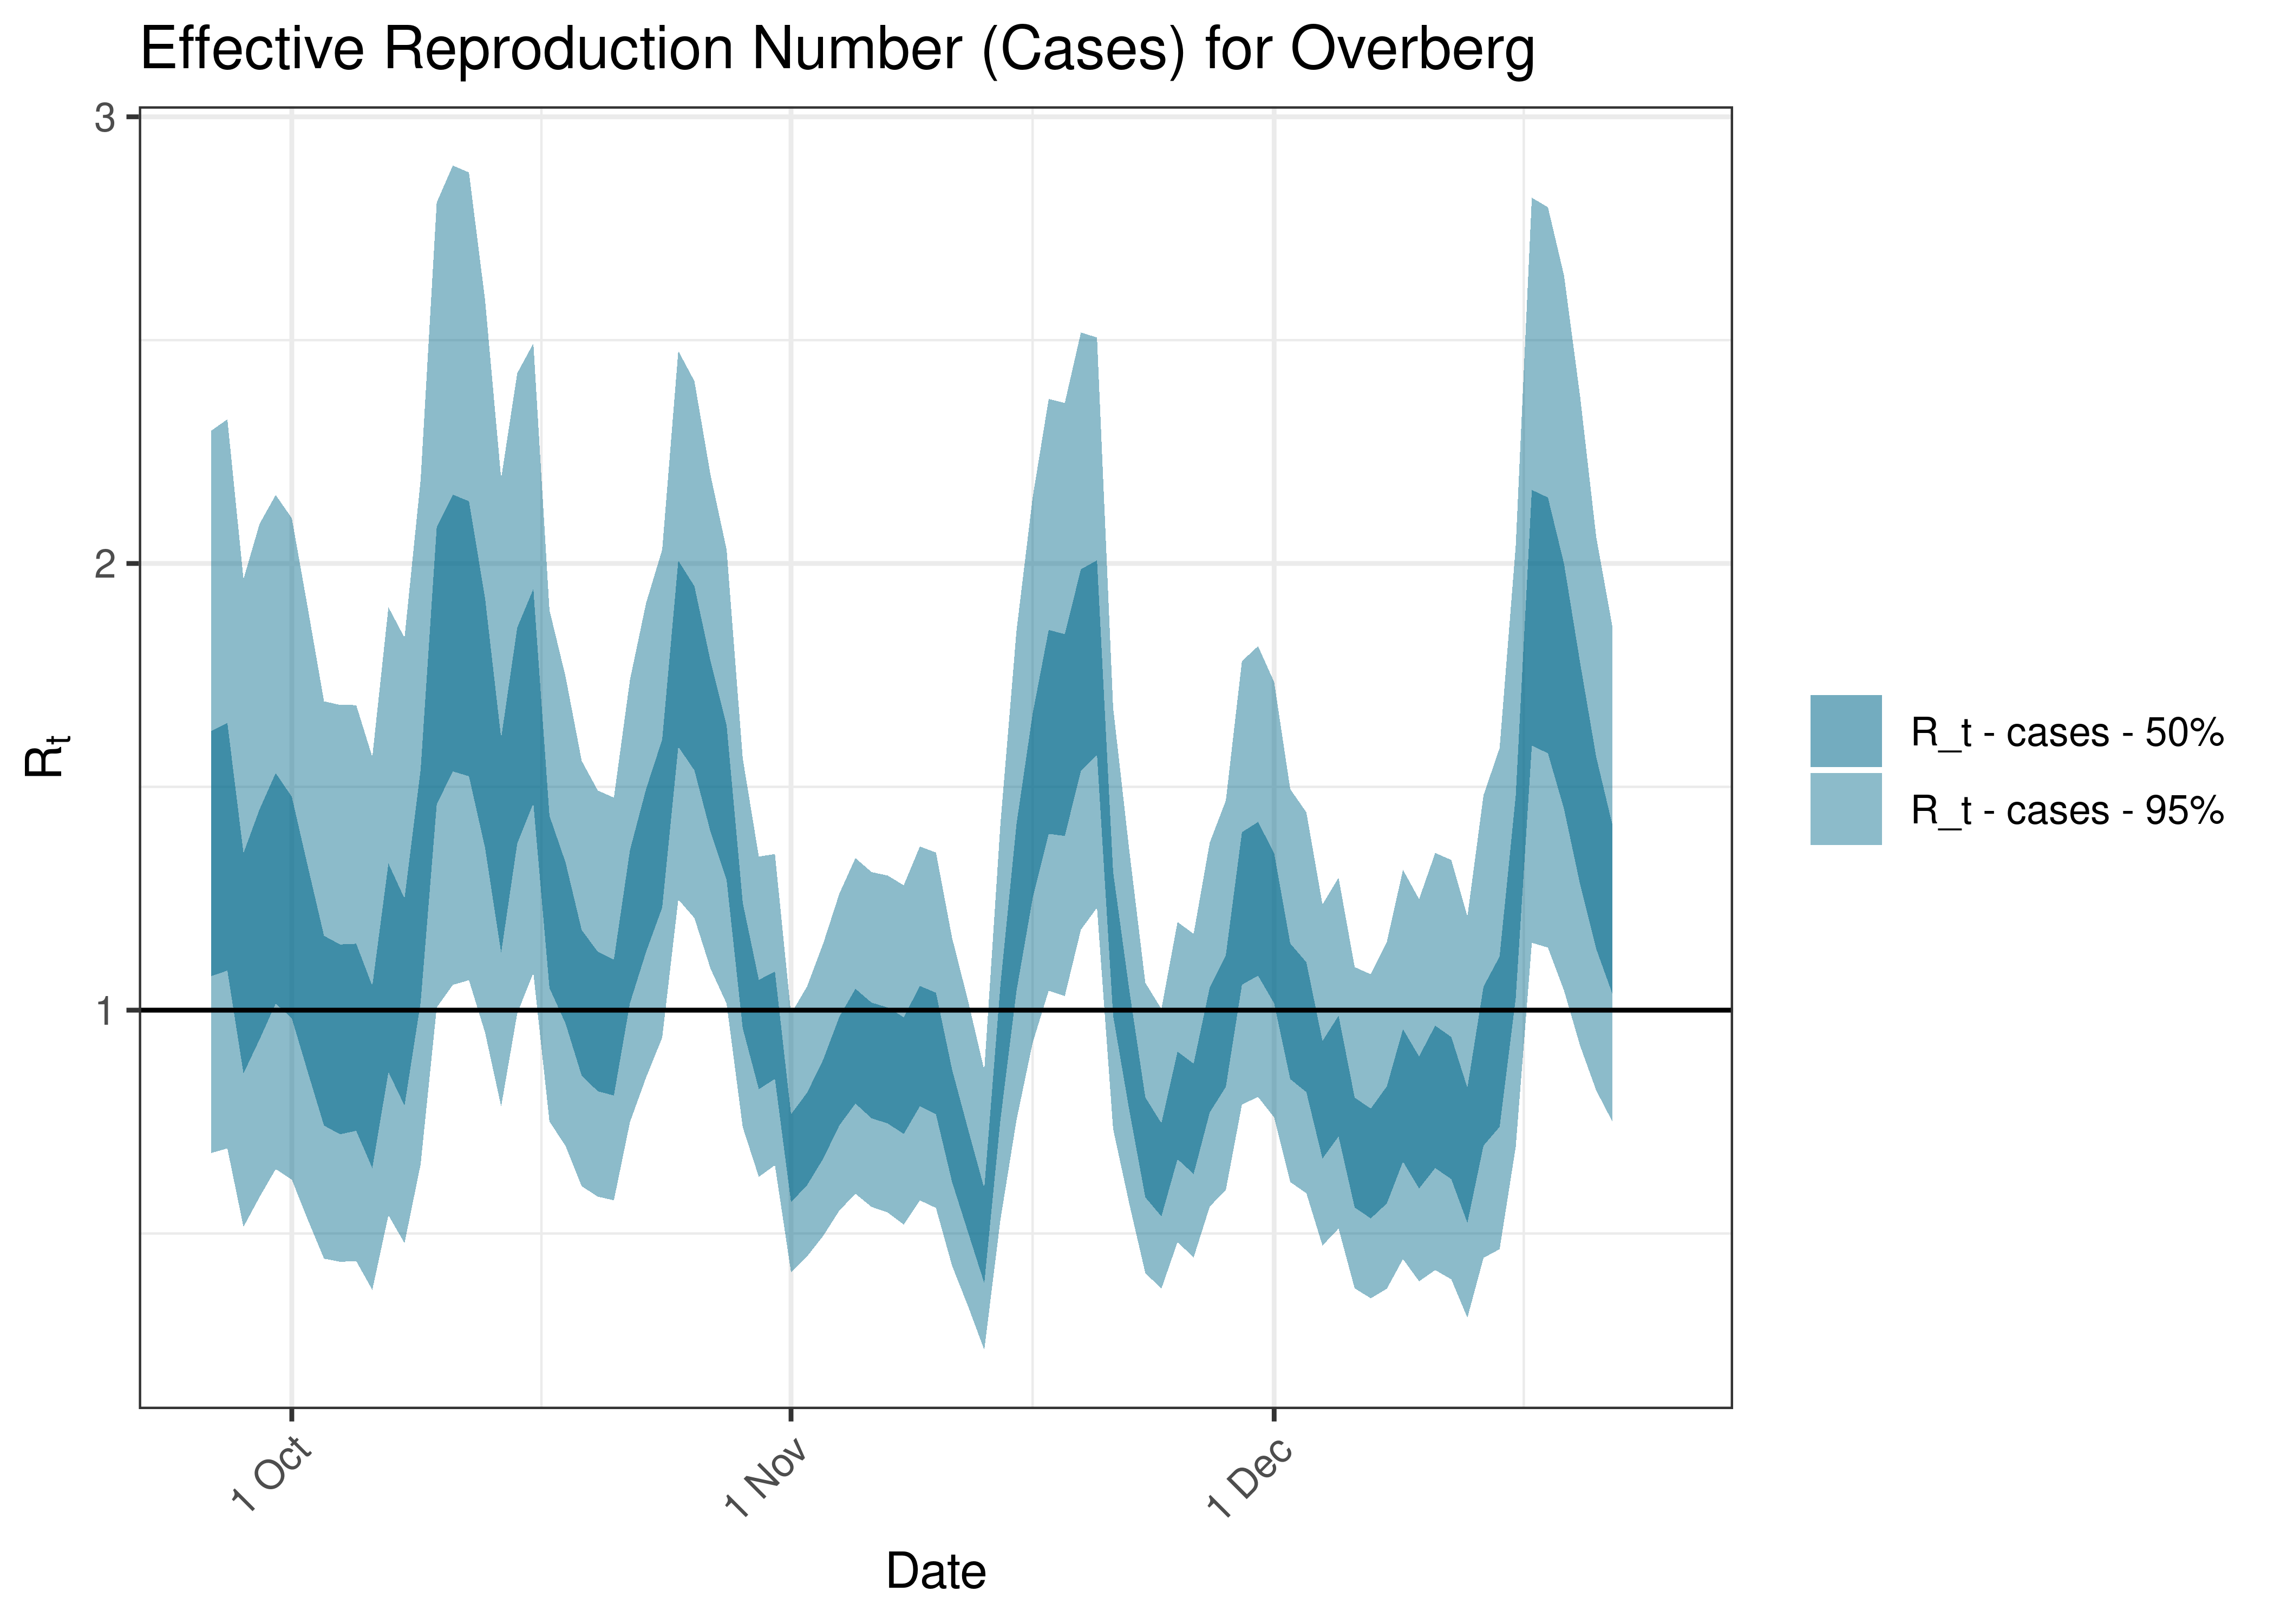 Estimated Effective Reproduction Number Based on Cases for Overberg over last 90 days